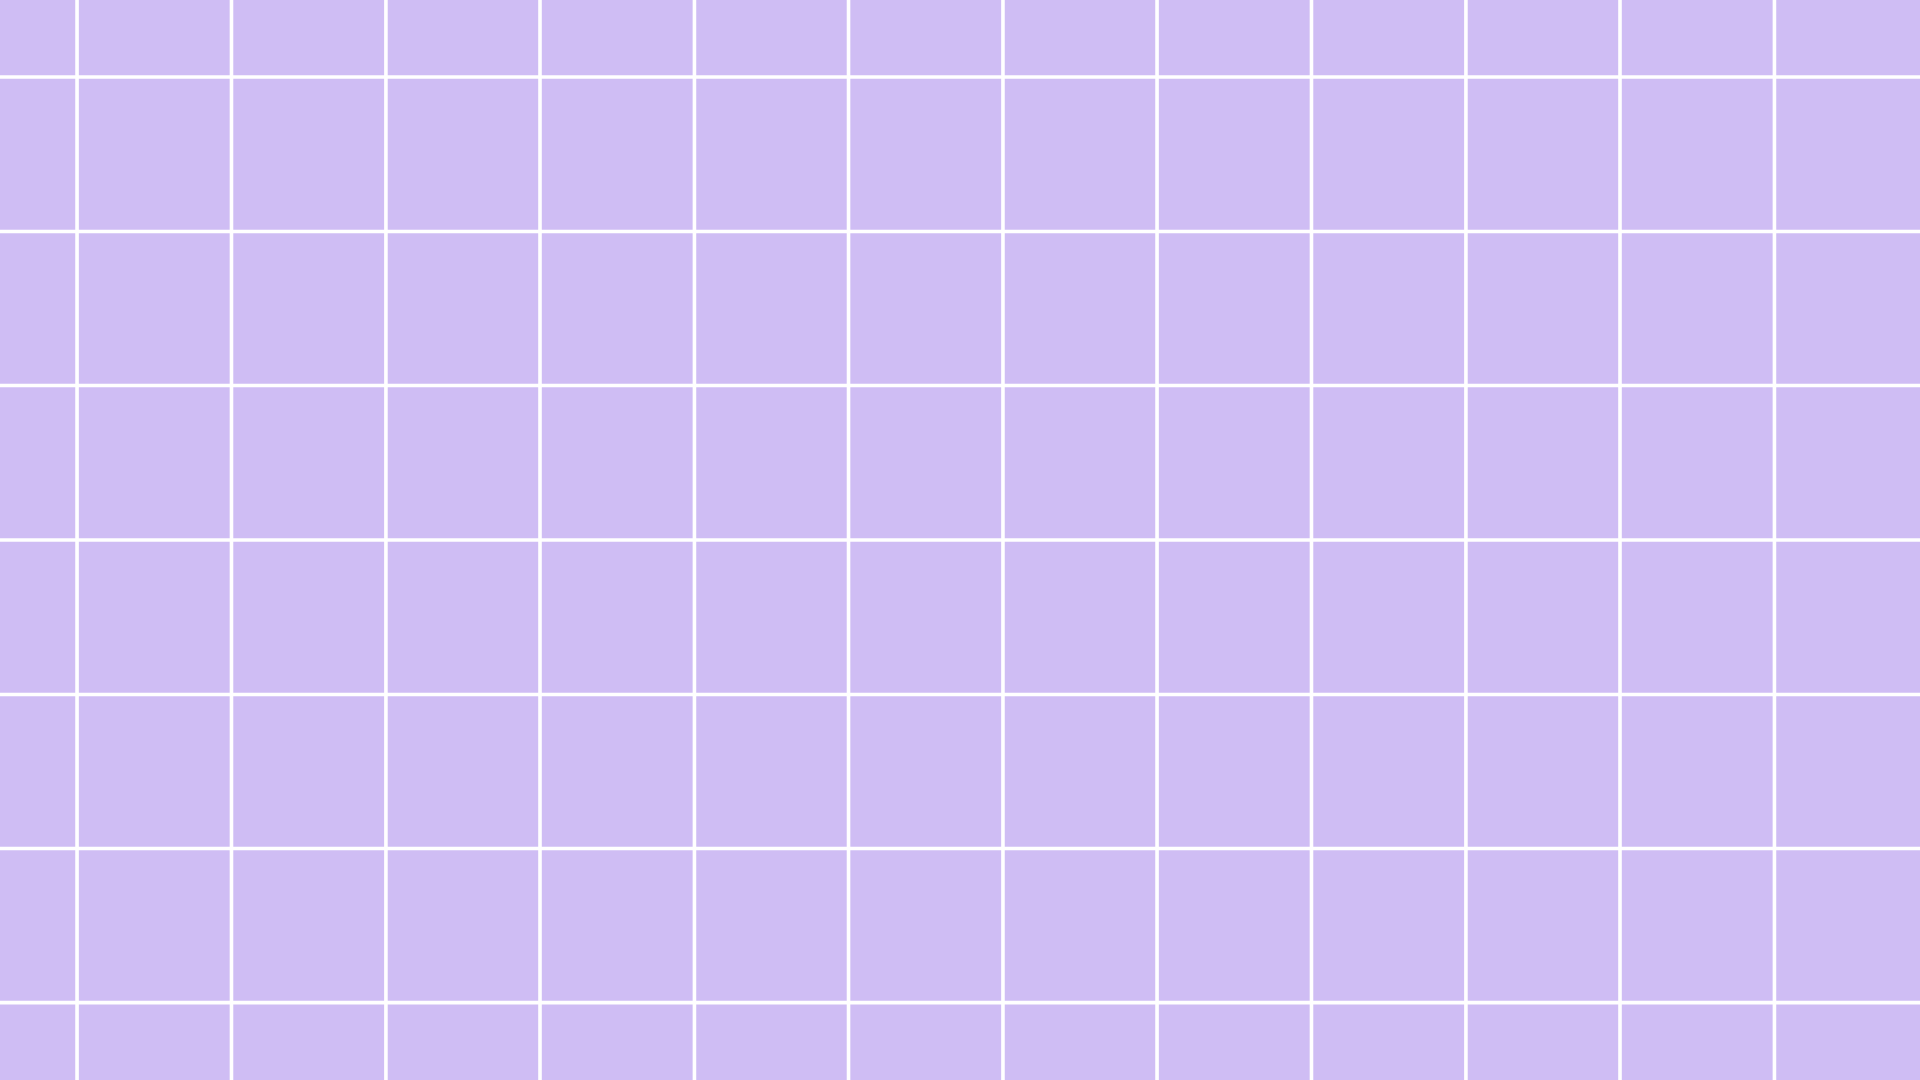 A purple grid pattern with white squares - Grid